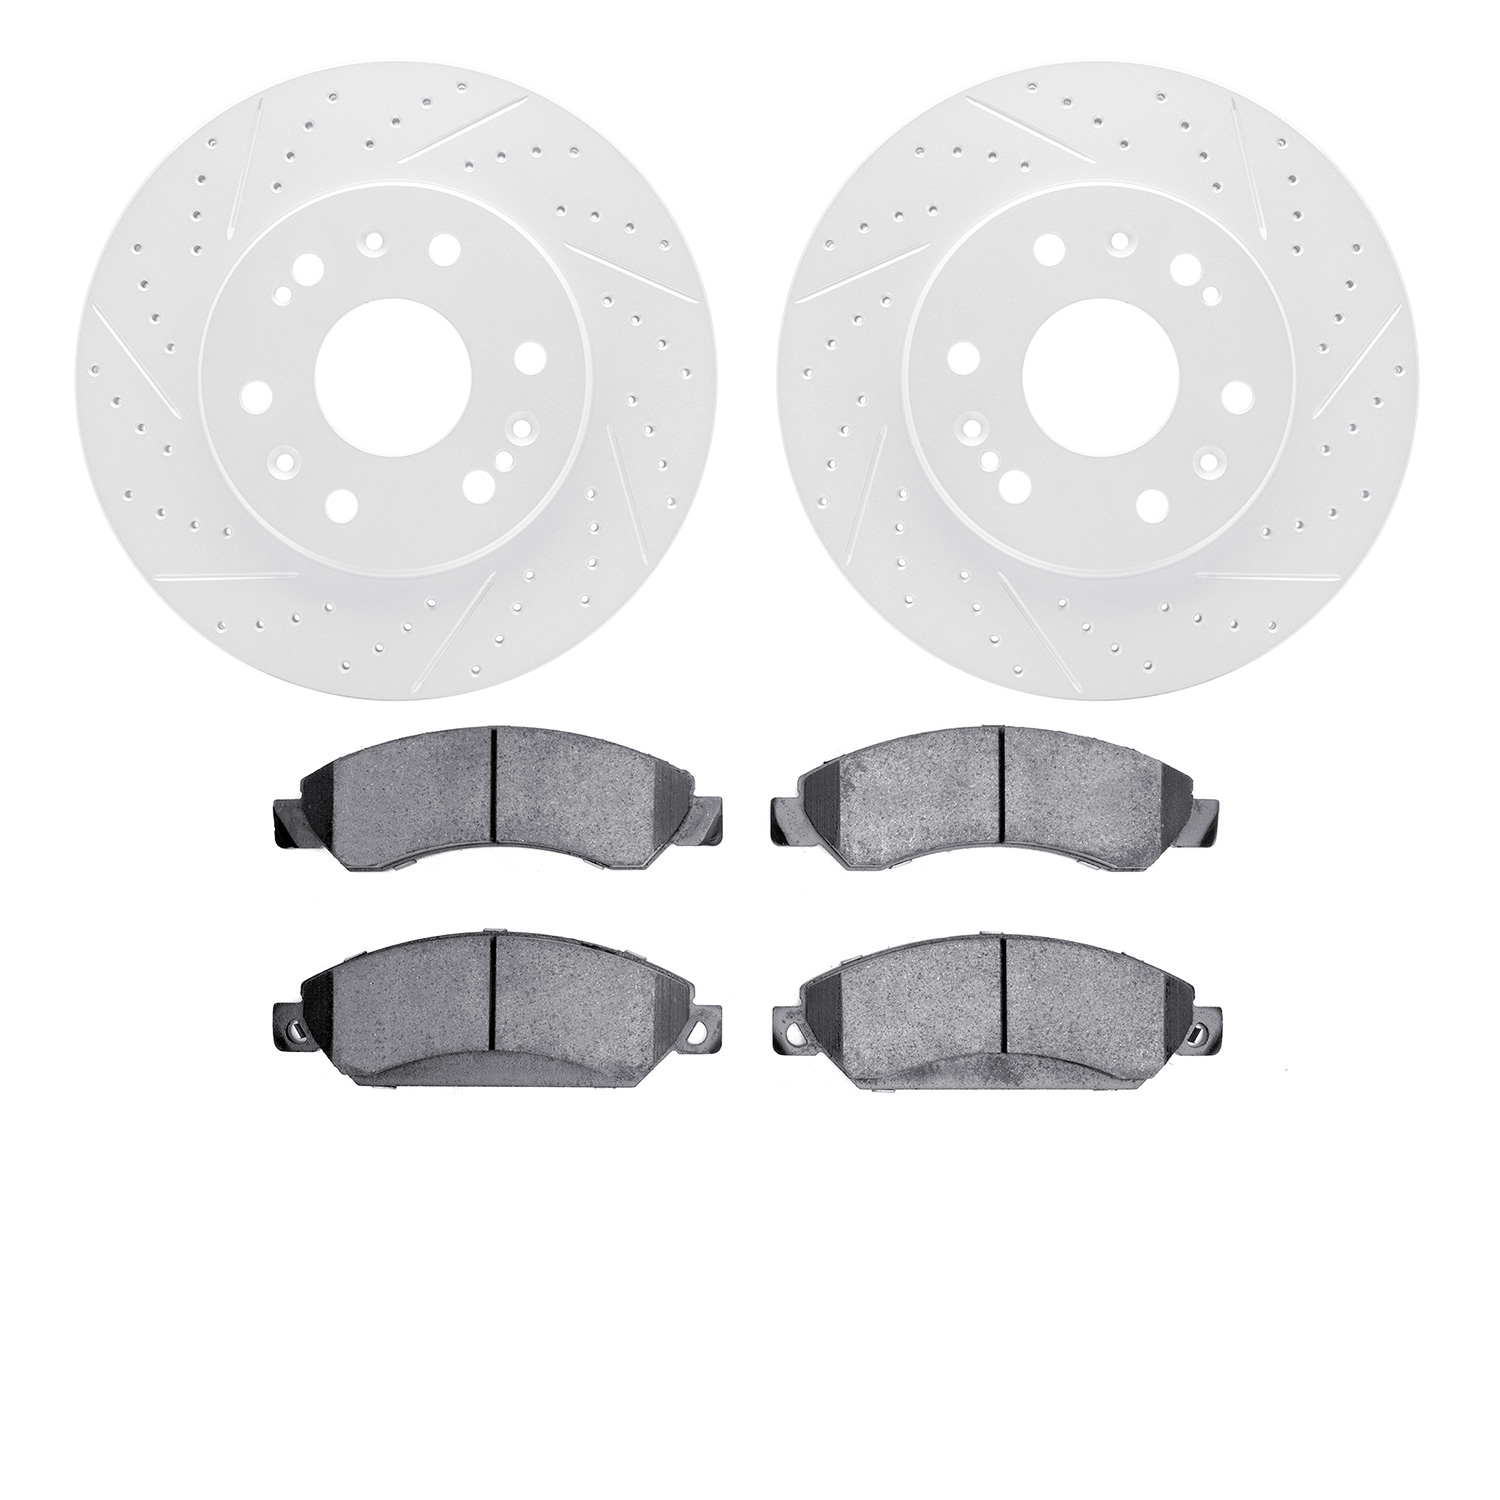 2402-48022 Geoperformance Drilled/Slotted Brake Rotors with Ultimate-Duty Brake Pads Kit, 2005-2008 GM, Position: Front